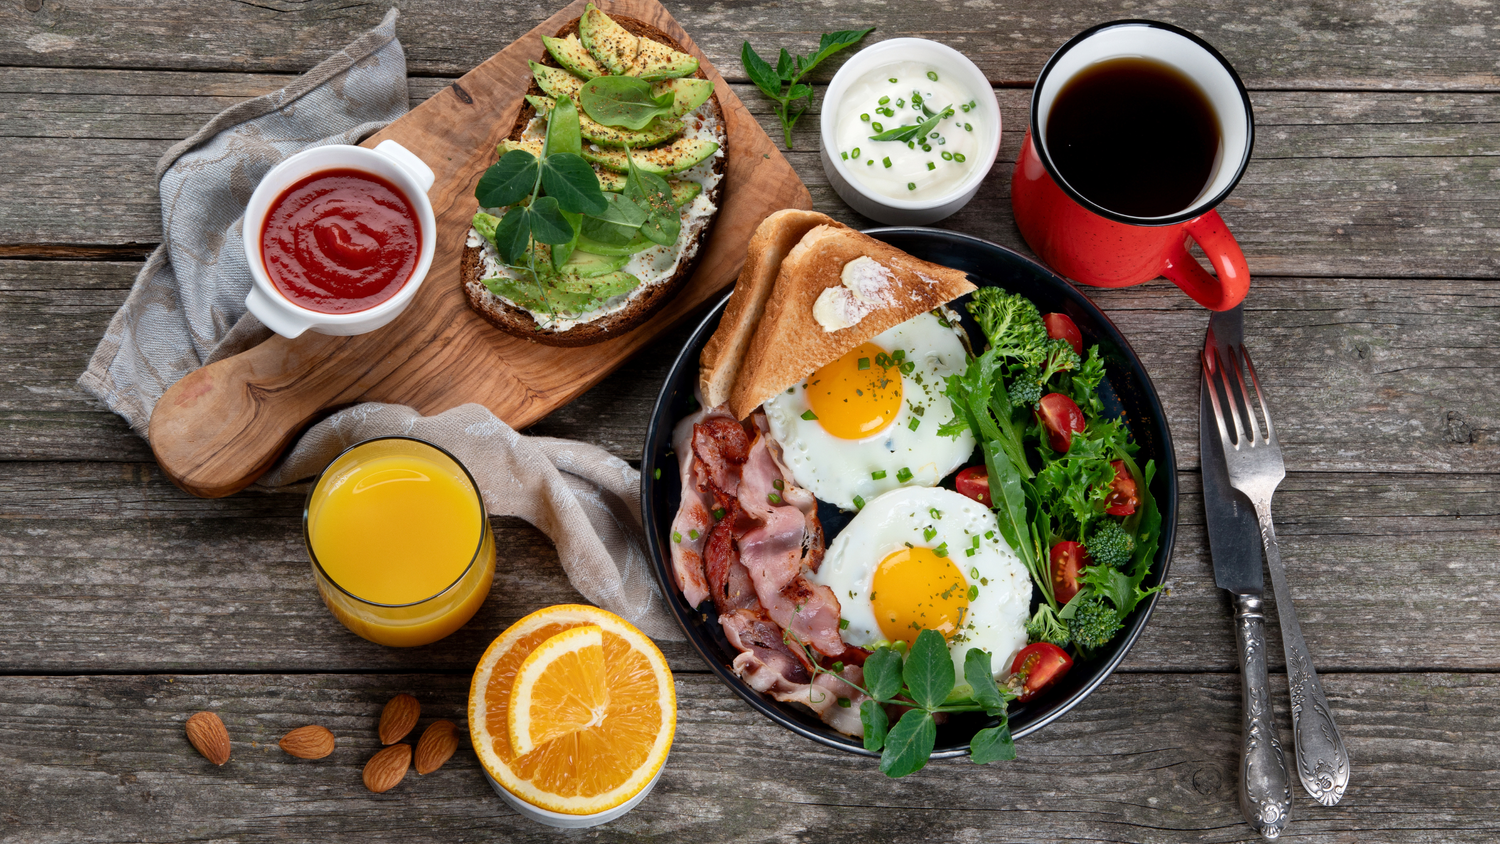 Healthy breakfast food tips for eating at home and on the go